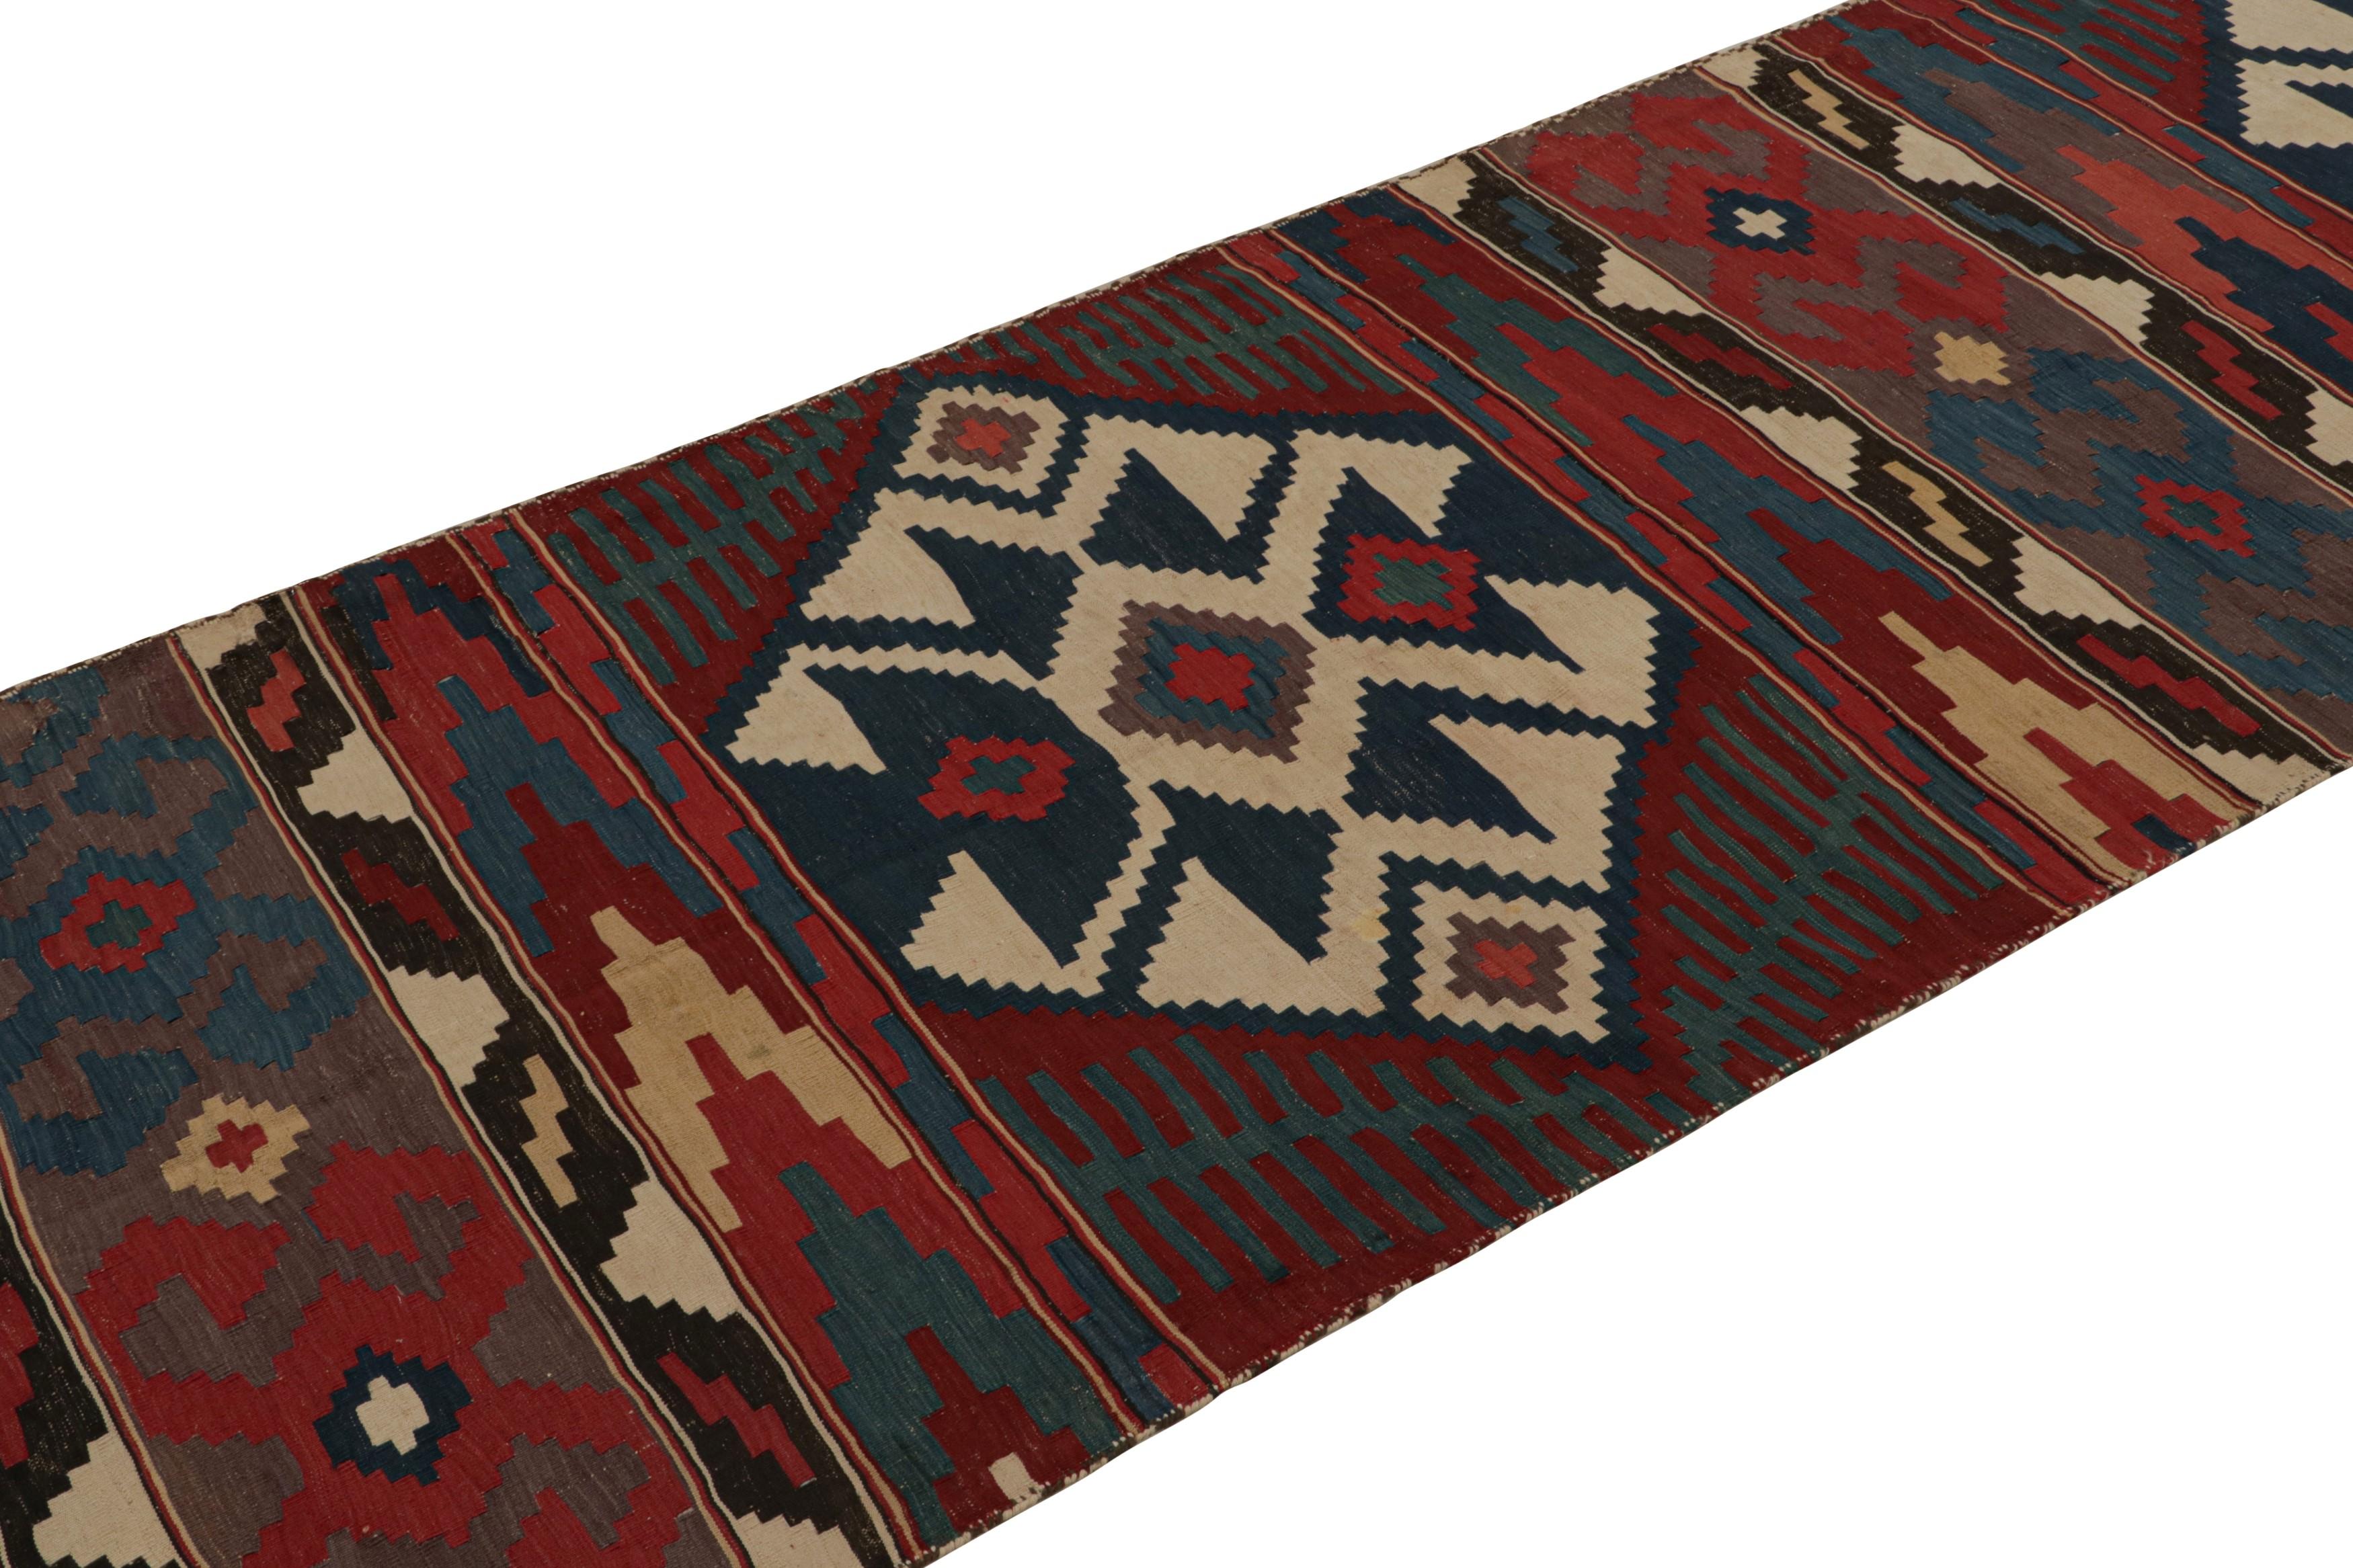 Tribal Twin Vintage Persian Kilim Runner Rugs with Geometric Patterns, from Rug & Kilim For Sale